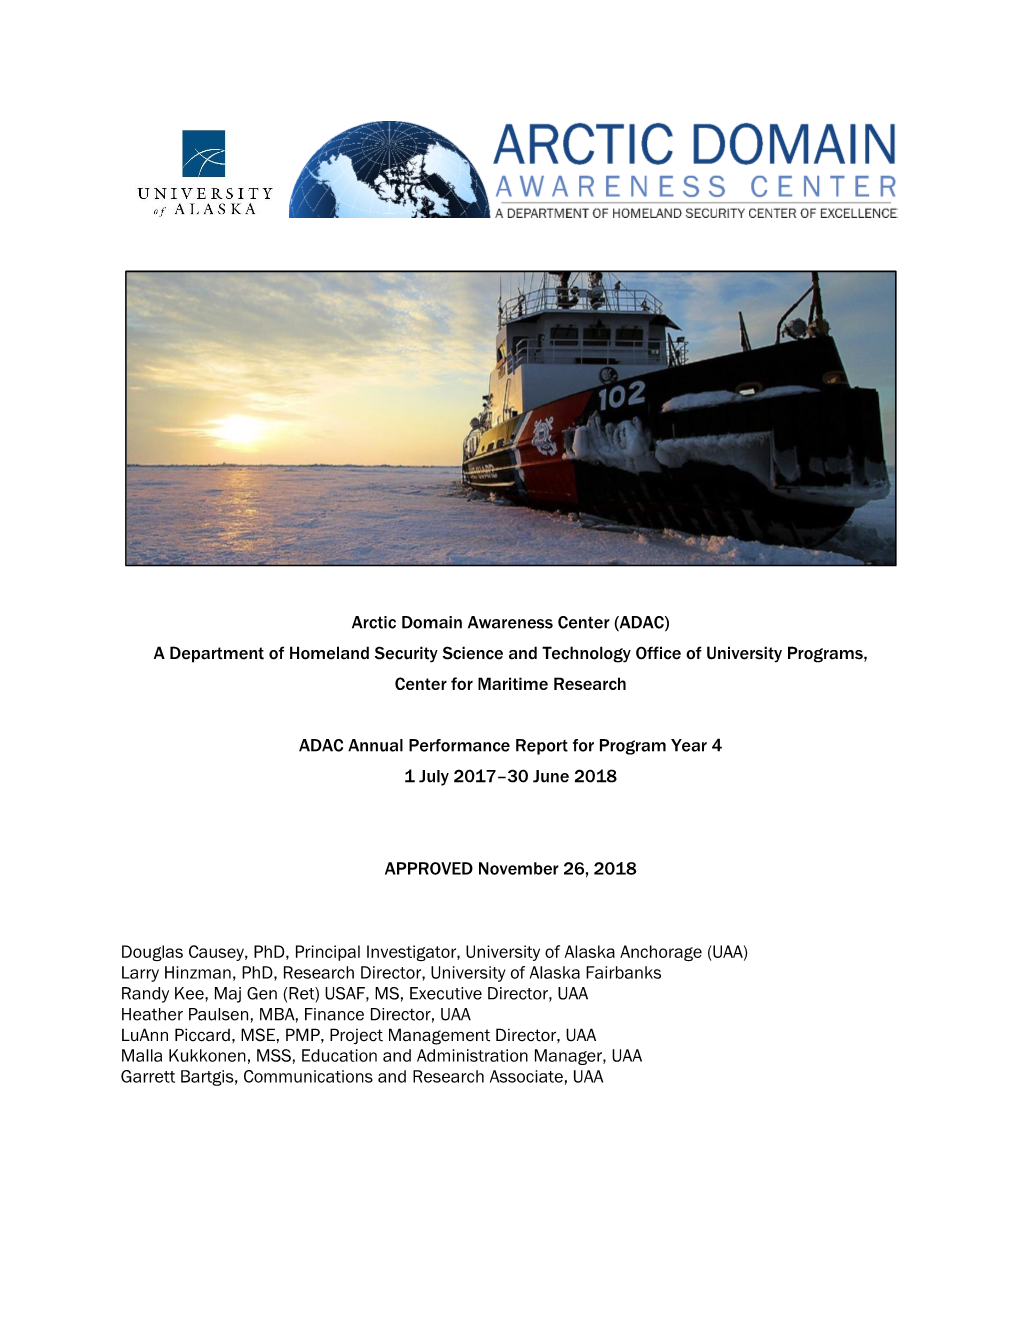 Arctic Domain Awareness Center (ADAC) a Department of Homeland Security Science and Technology Office of University Programs, Center for Maritime Research